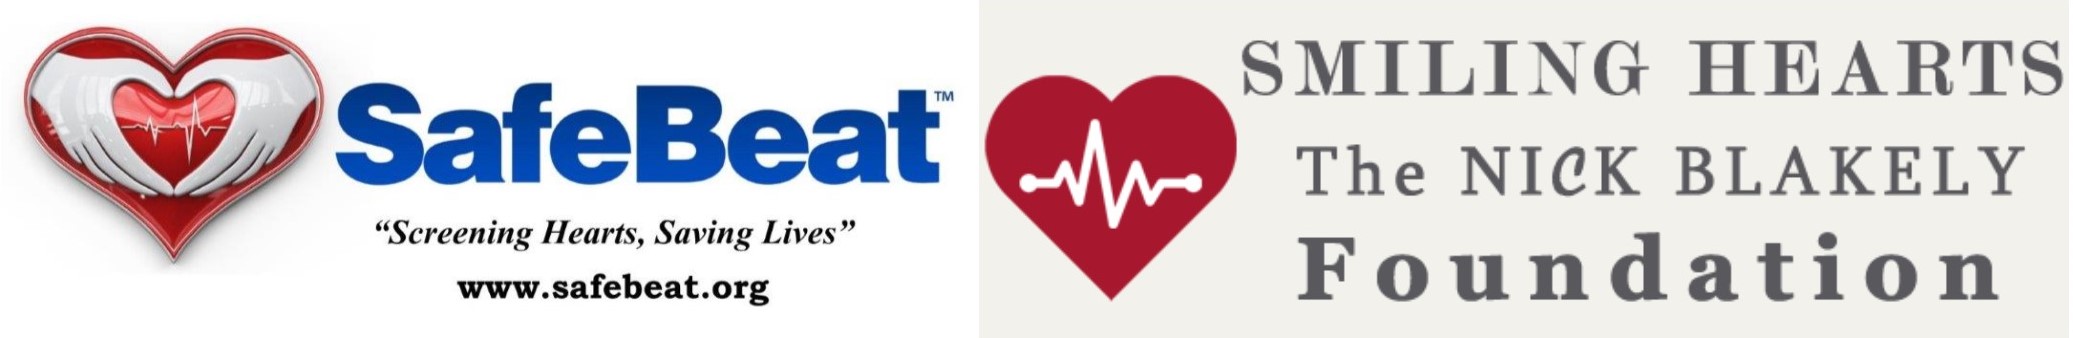 SafeBeat Collaborates with Smiling Hearts: Nick Blakely Foundation to Provide Sudden Cardiac Awareness, Preventative Heart Screening, and CPR/AED Education